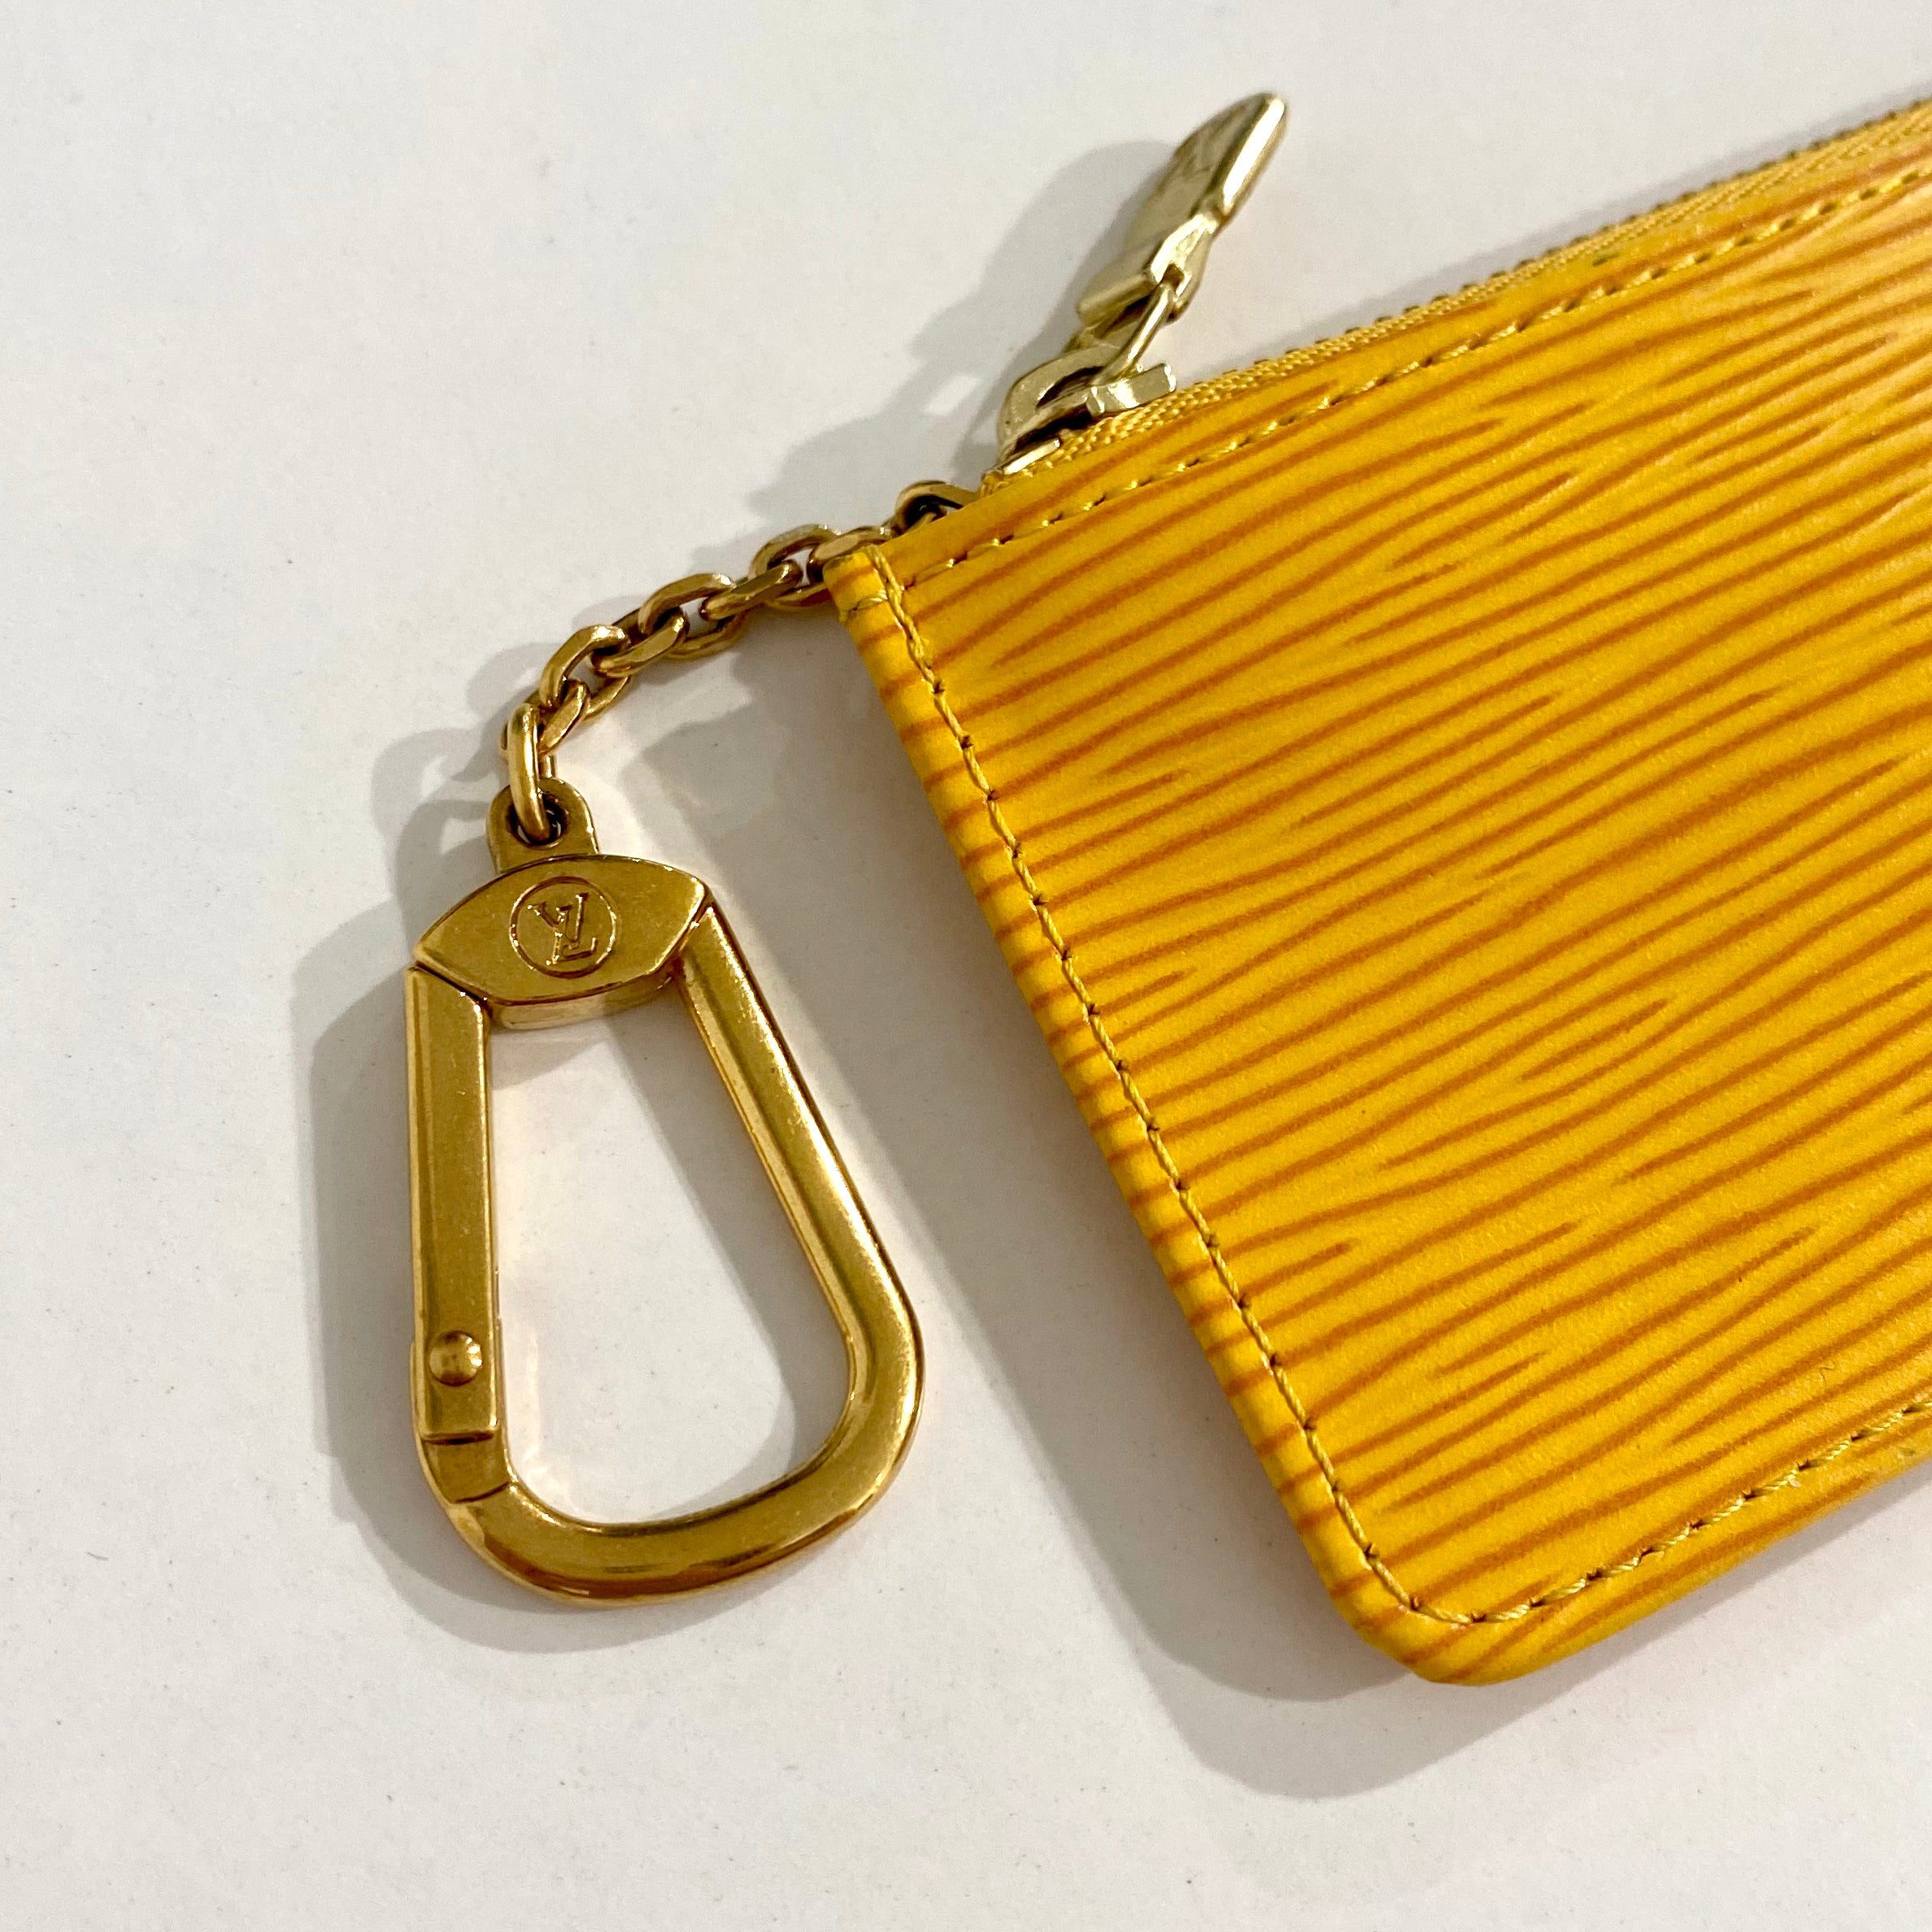 Review of Louis Vuitton Key Pouch - The Feathered Nester